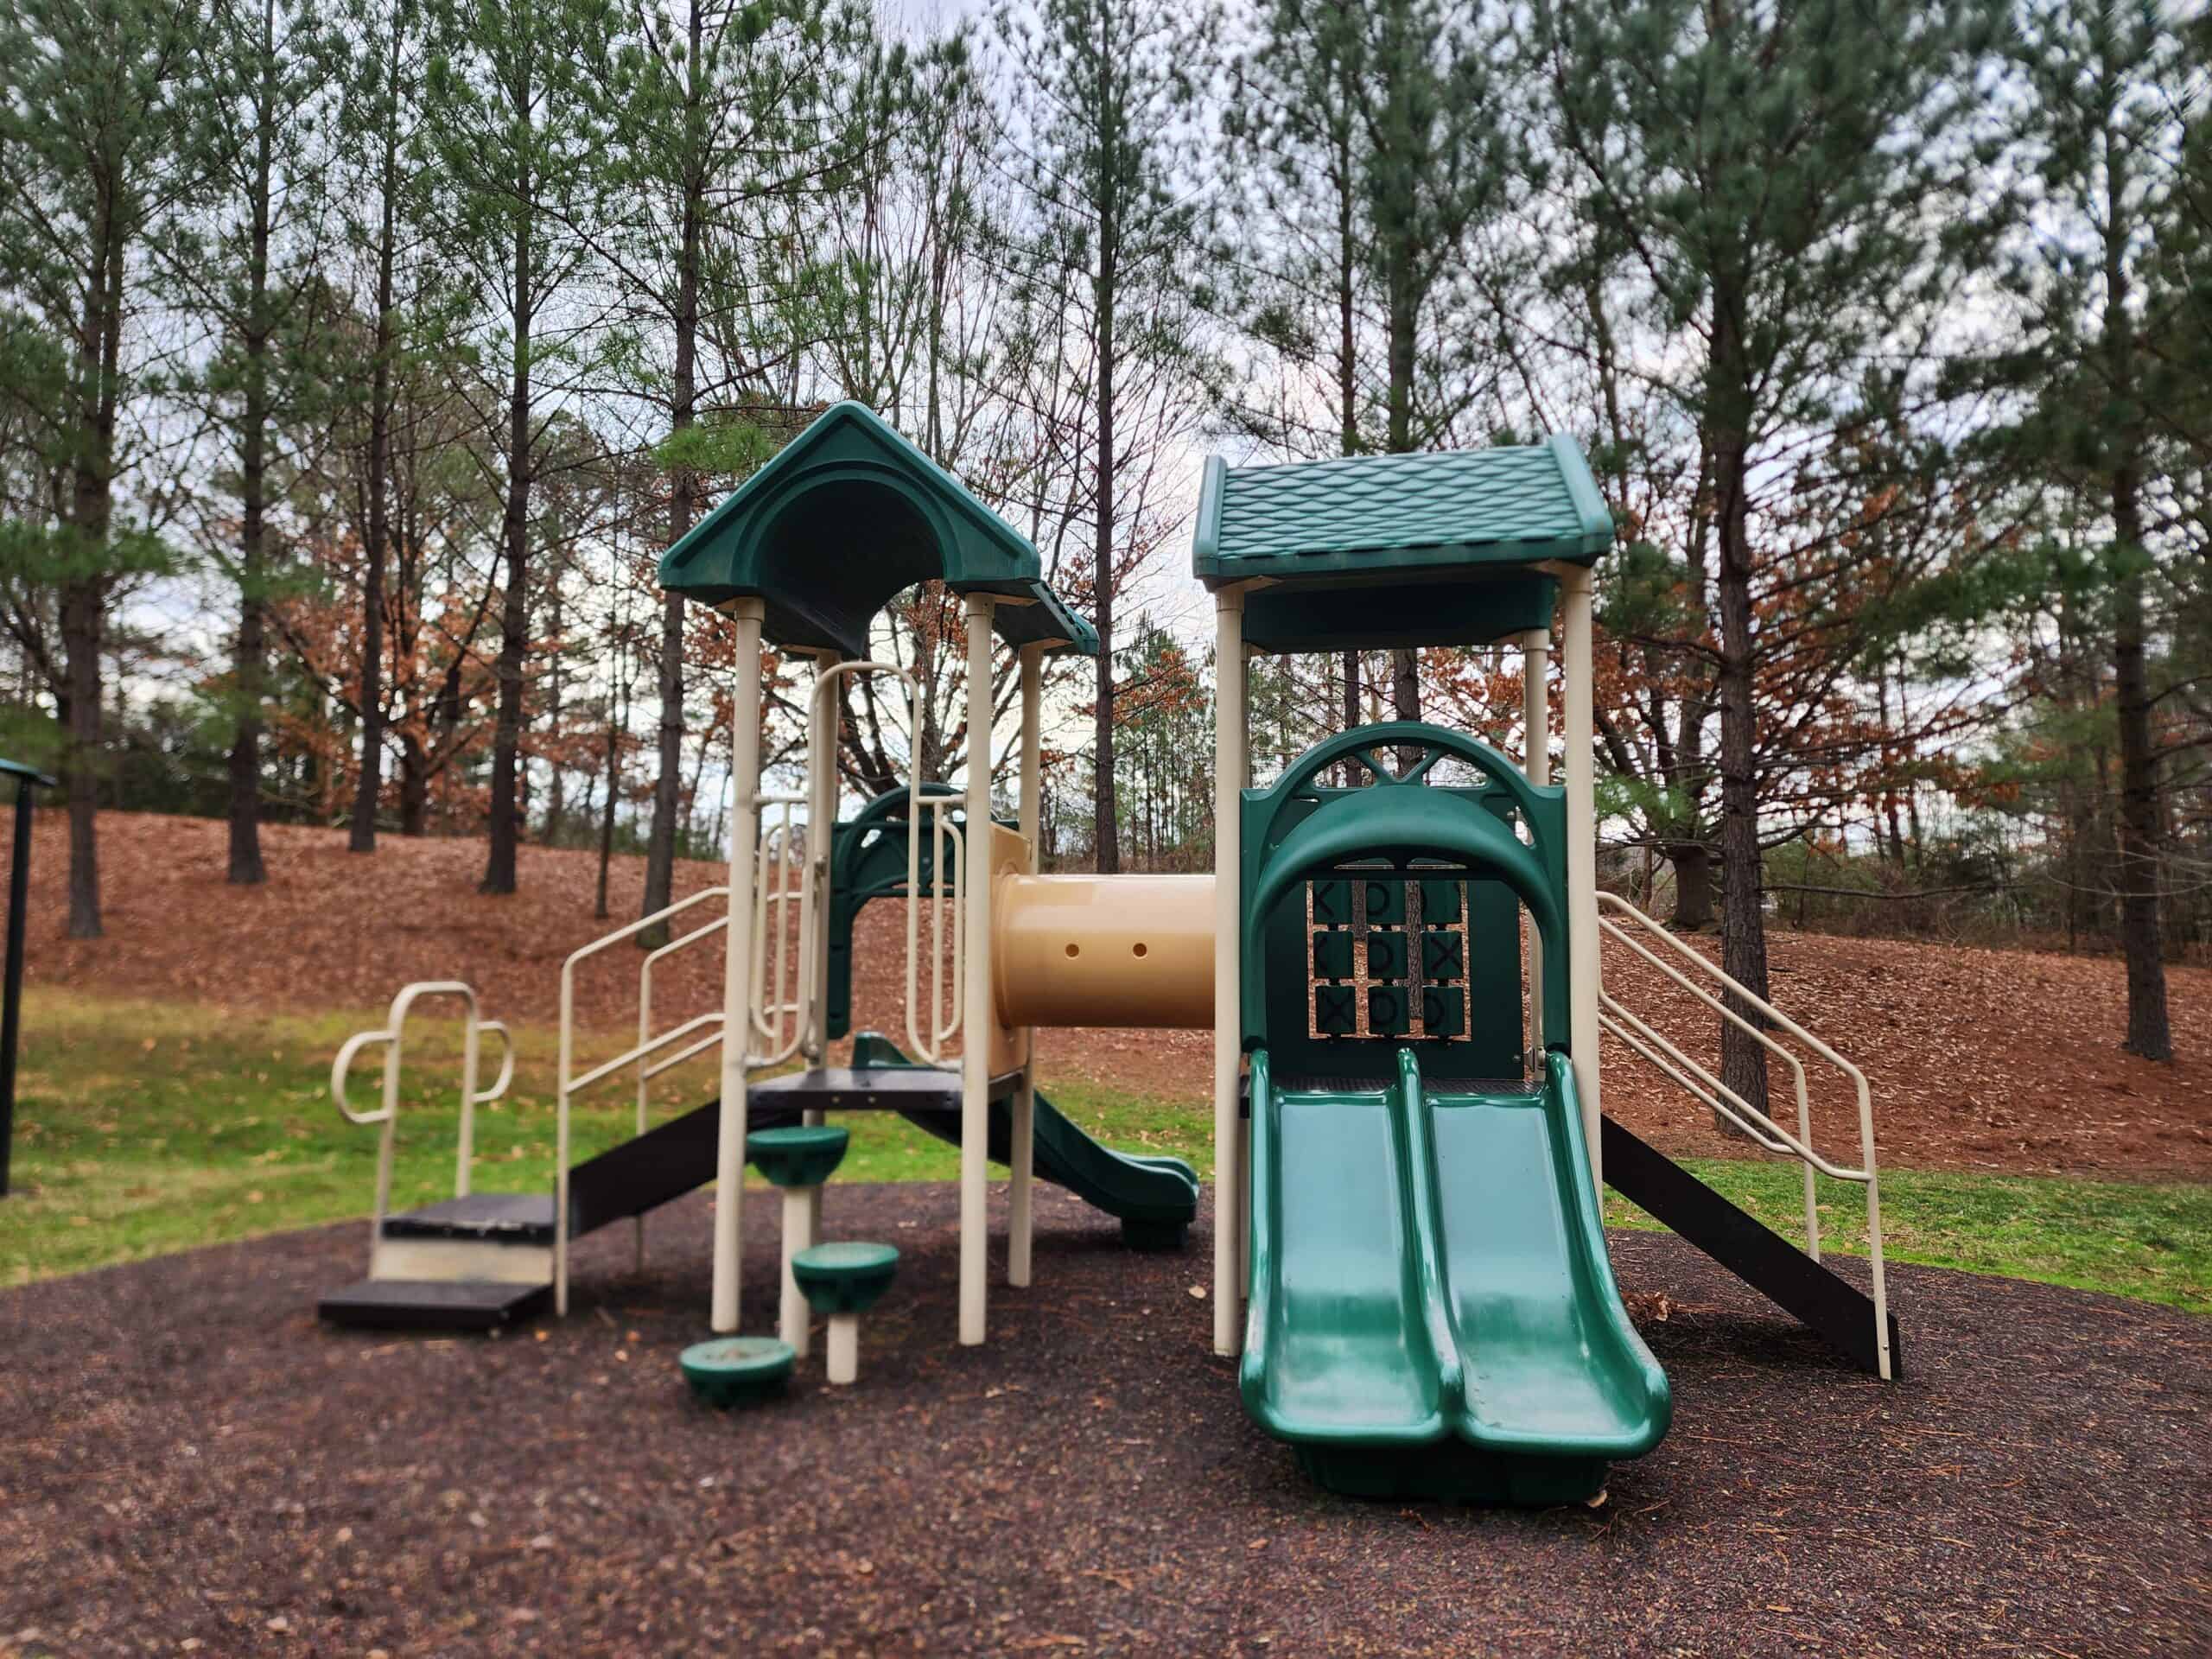 A playground featuring a dual green slide, stairs, and various platforms, nestled among tall pine trees on a grey day